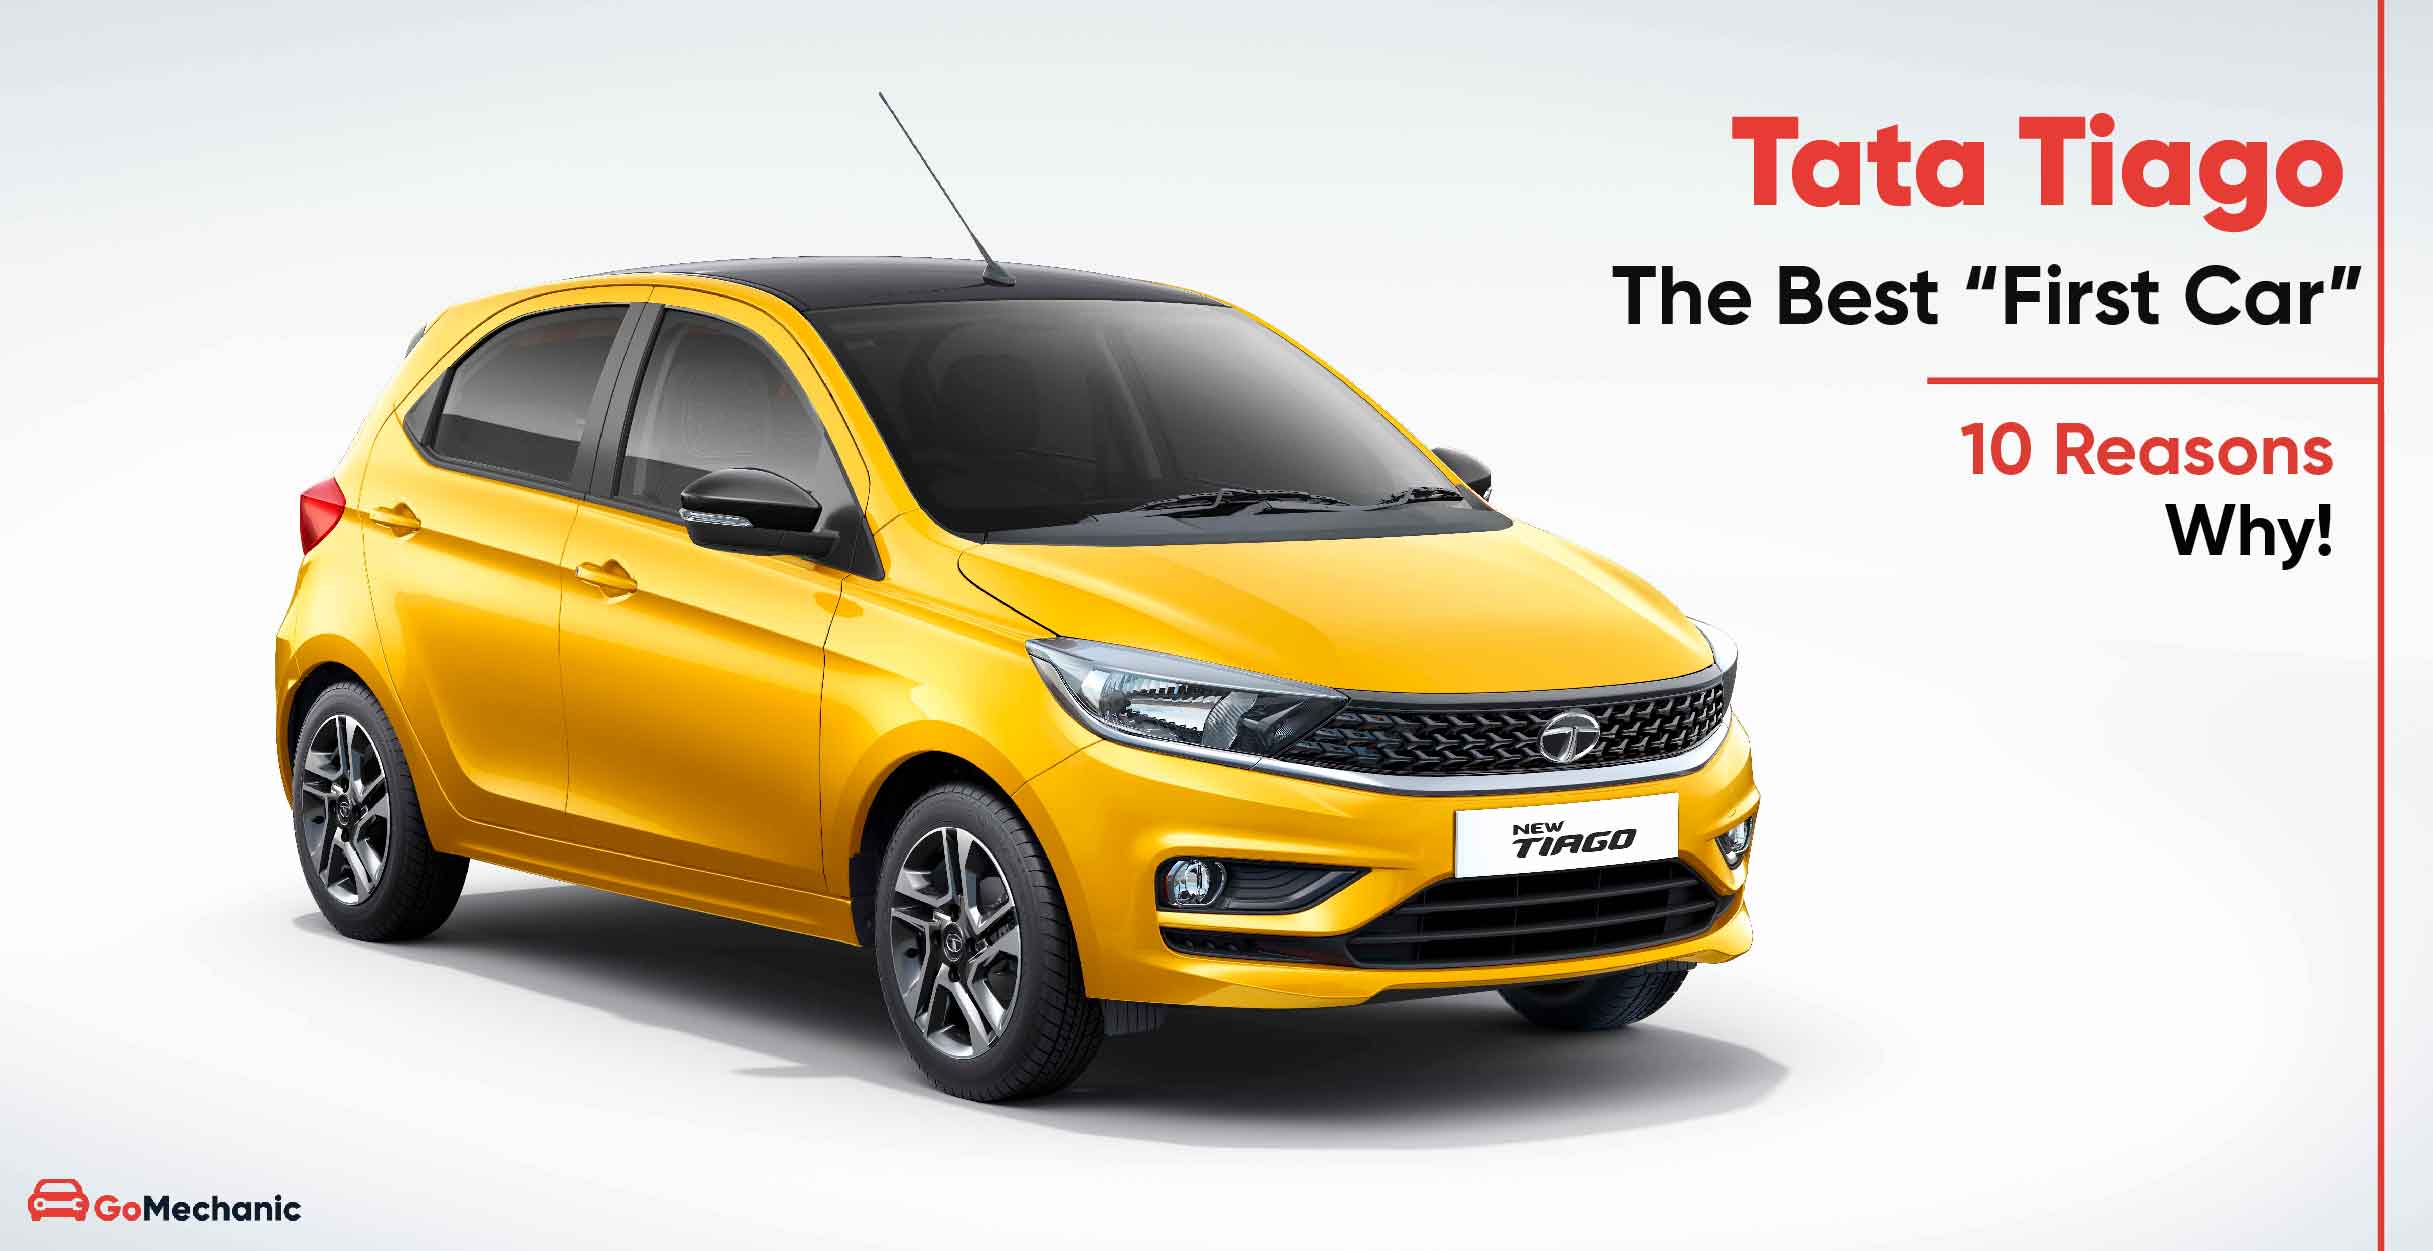 10 reasons why the tata tiago is the best first car